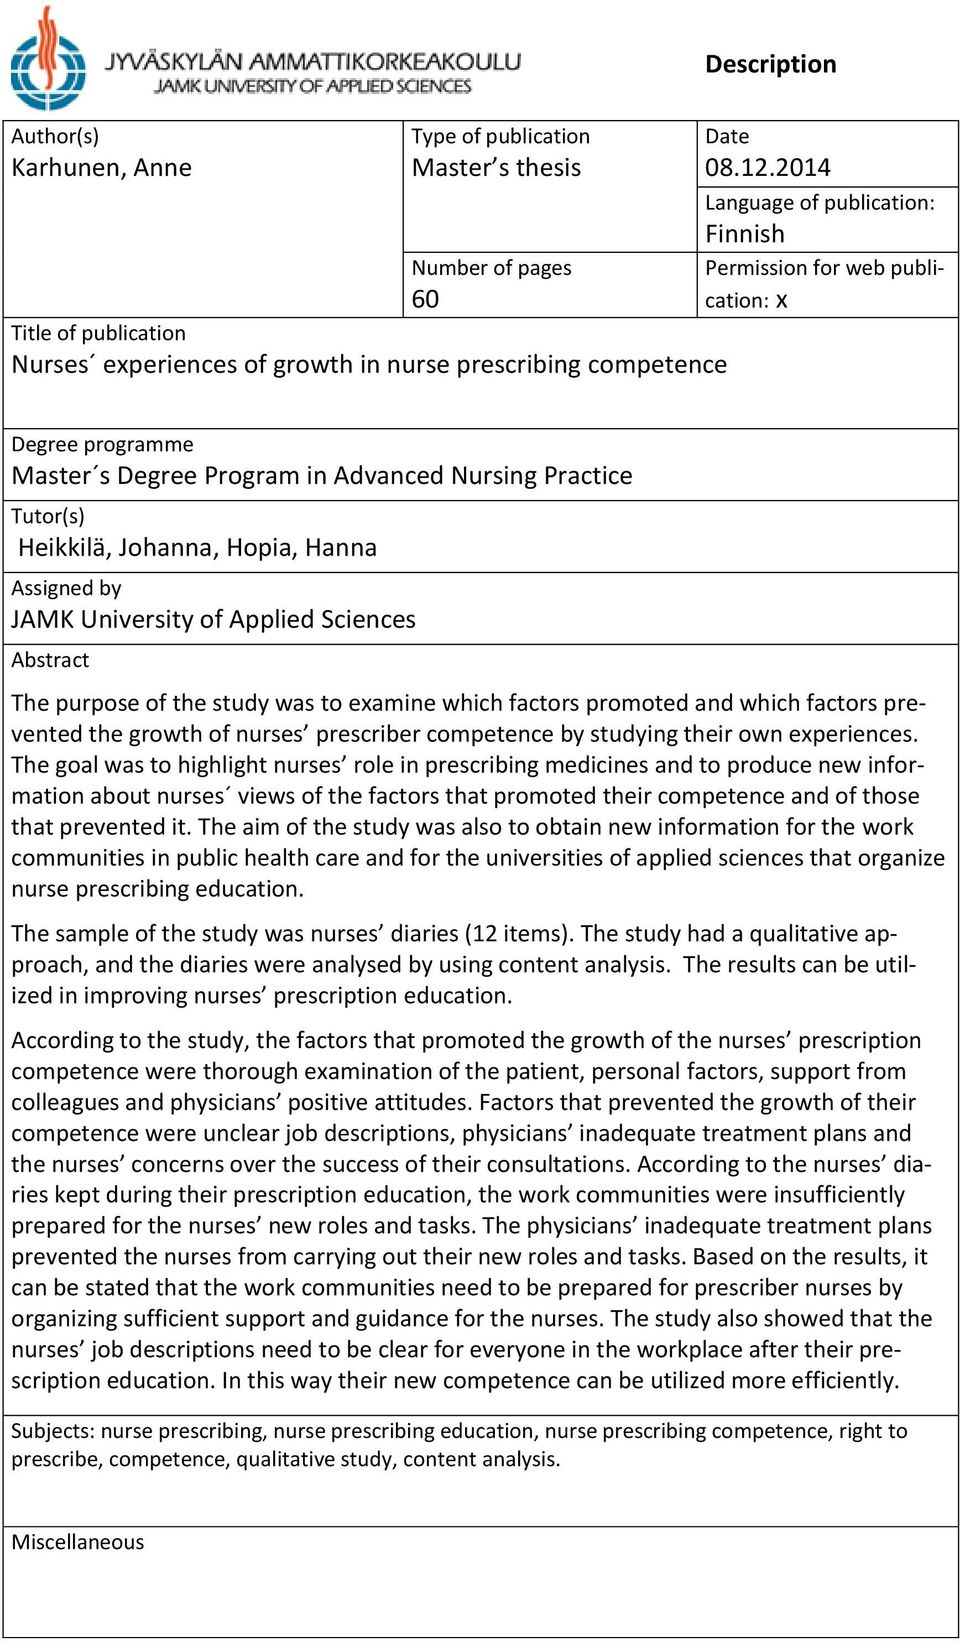 University of Applied Sciences Abstract The purpose of the study was to examine which factors promoted and which factors prevented the growth of nurses prescriber competence by studying their own